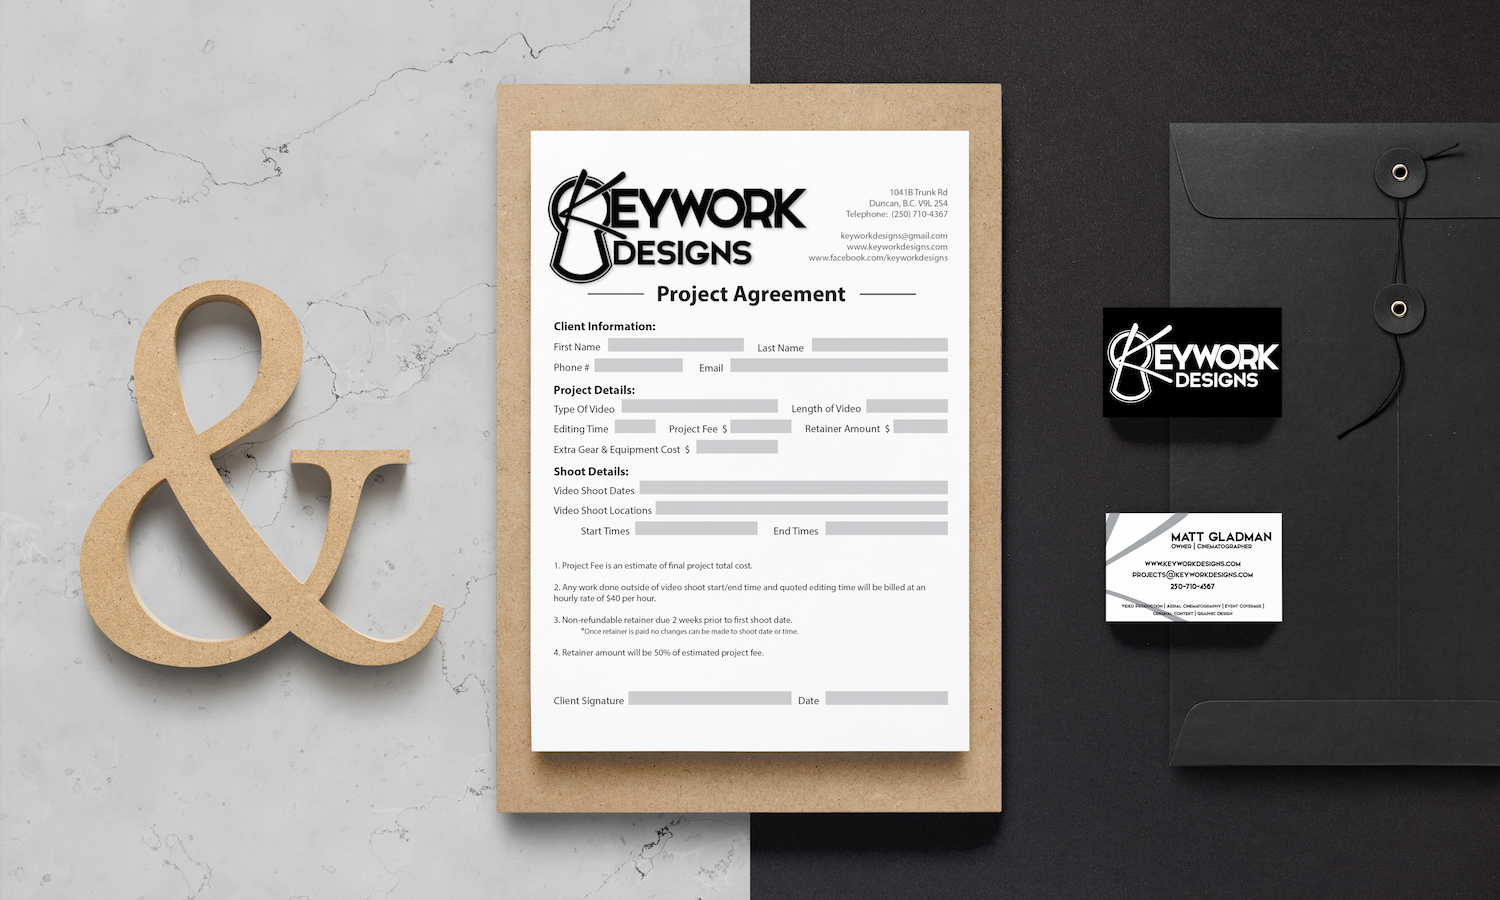 Mockup of branded stationary. Business cards with a logo on one side and information on the other and a example contract page in the middle.